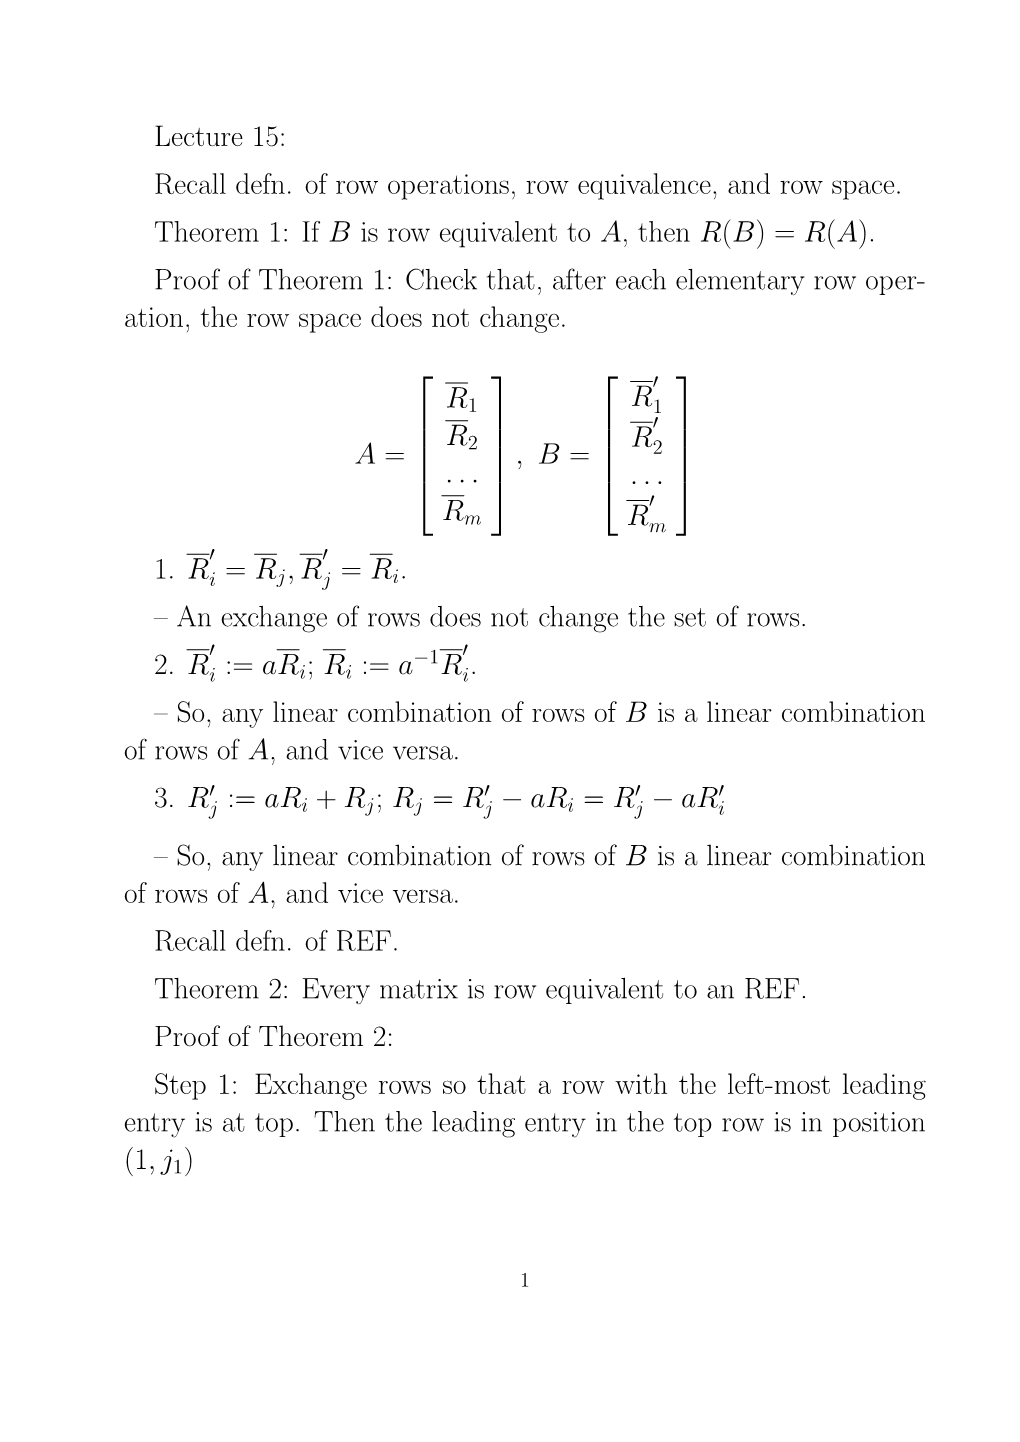 Lecture 15: Recall Defn. of Row Operations, Row Equivalence, and Row Space